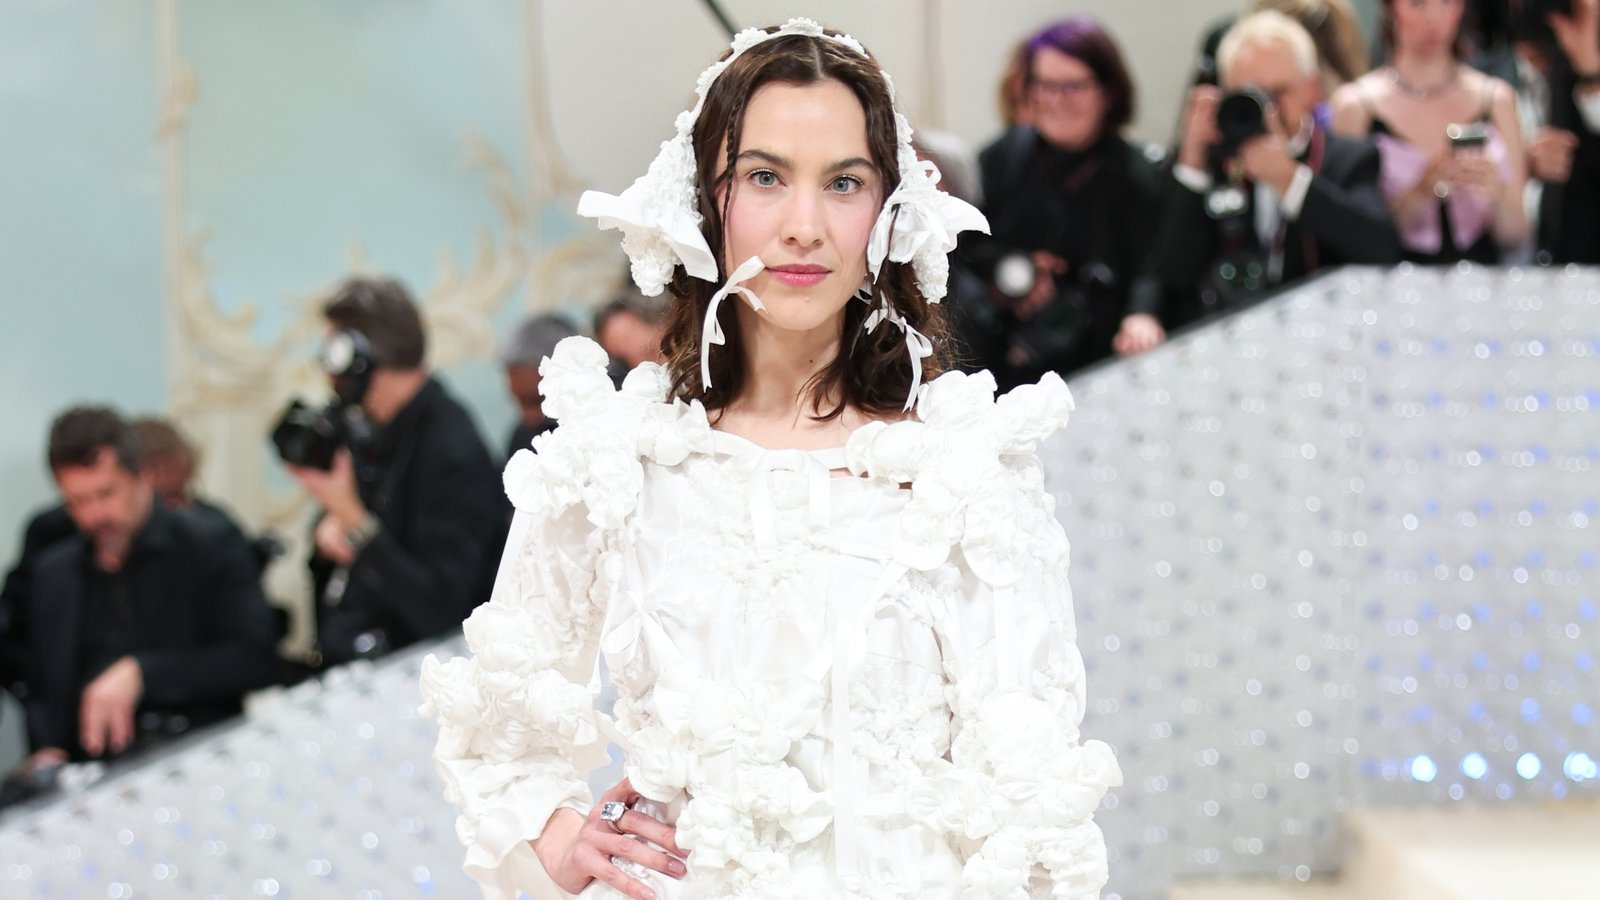 Alexa Chung wore gown by Dublin designer to the Met Gala